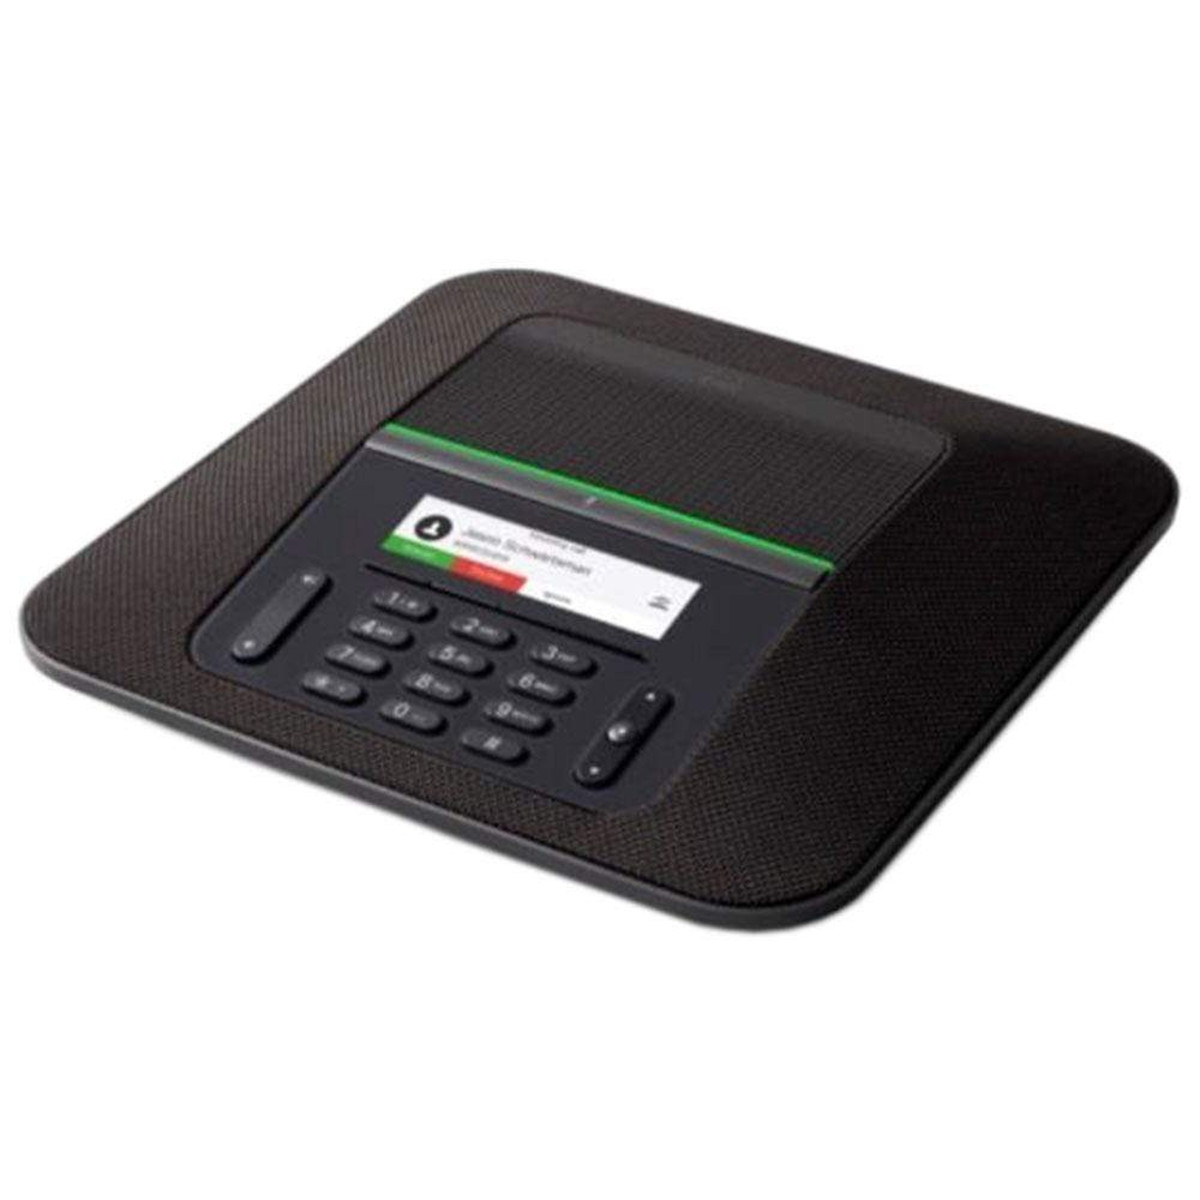 Cisco IP Conference 8832 VoIP Phone (p/n- CP-8832-K9-NA)